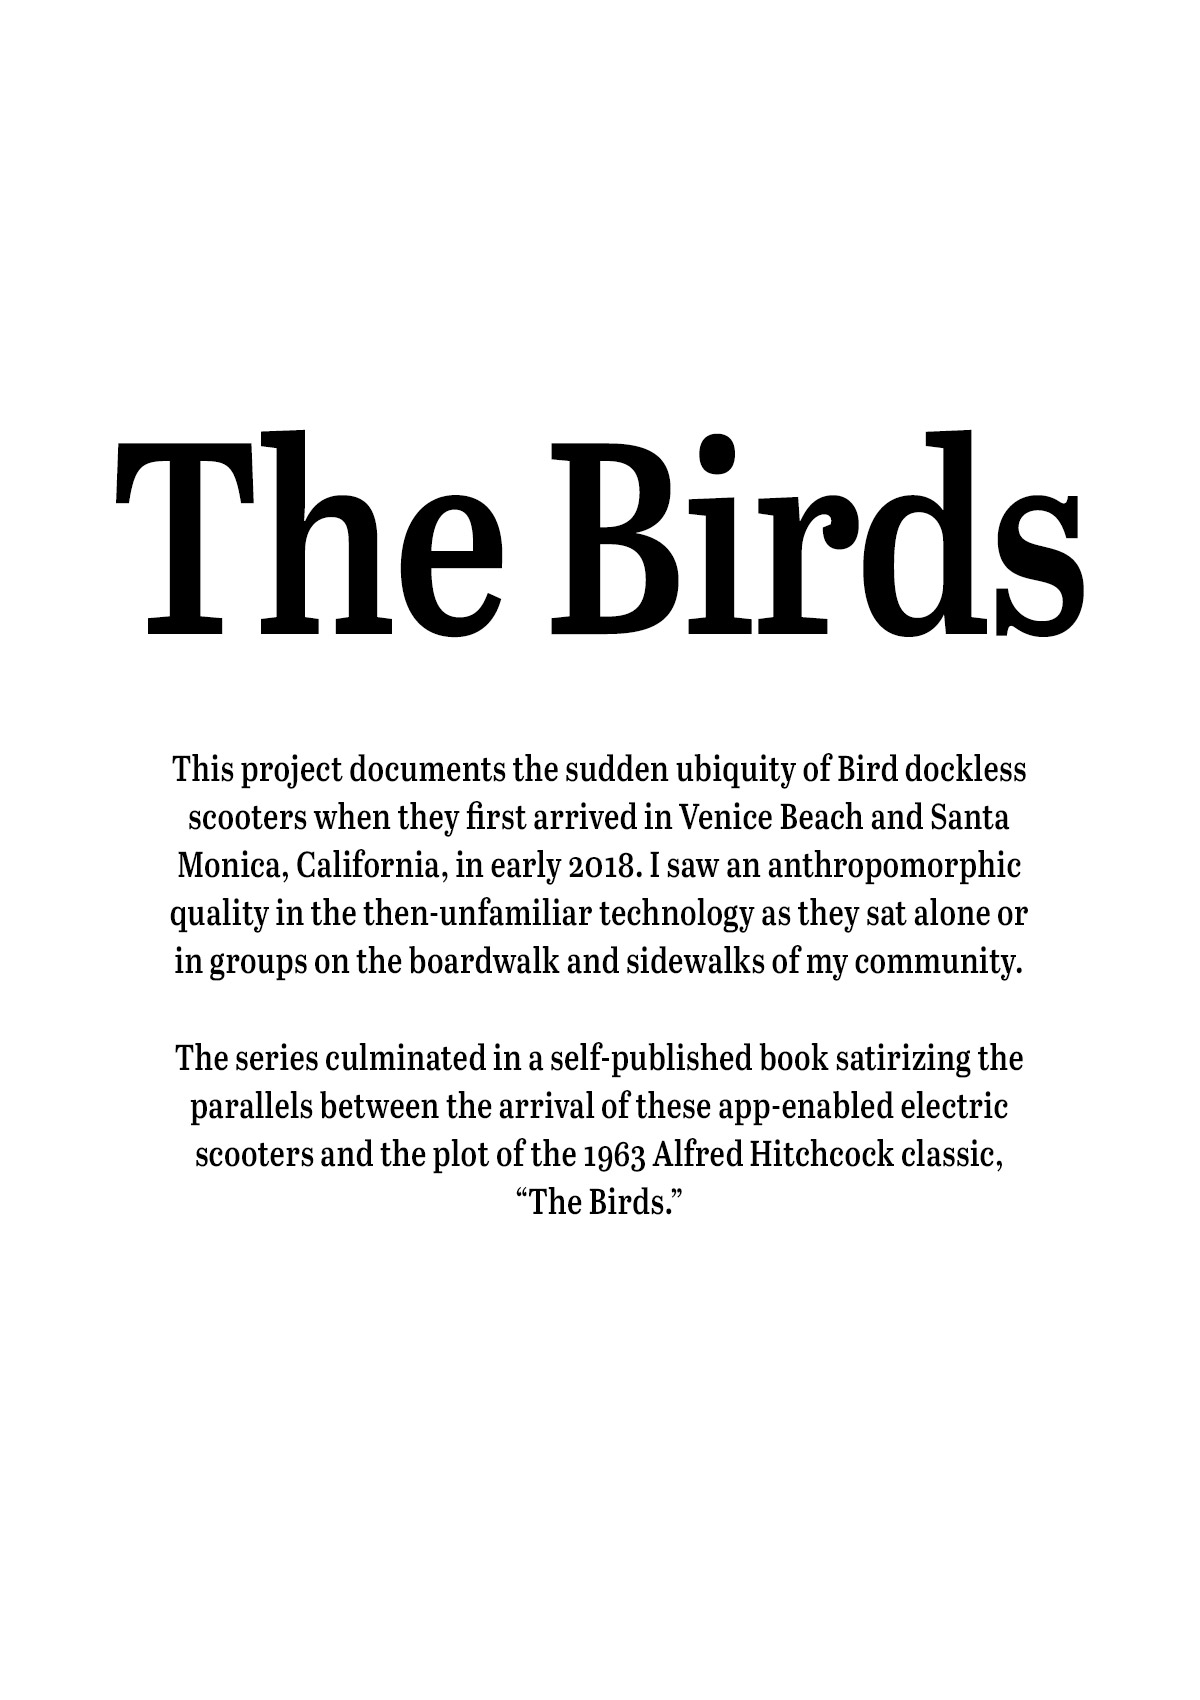 birds_title_page_a